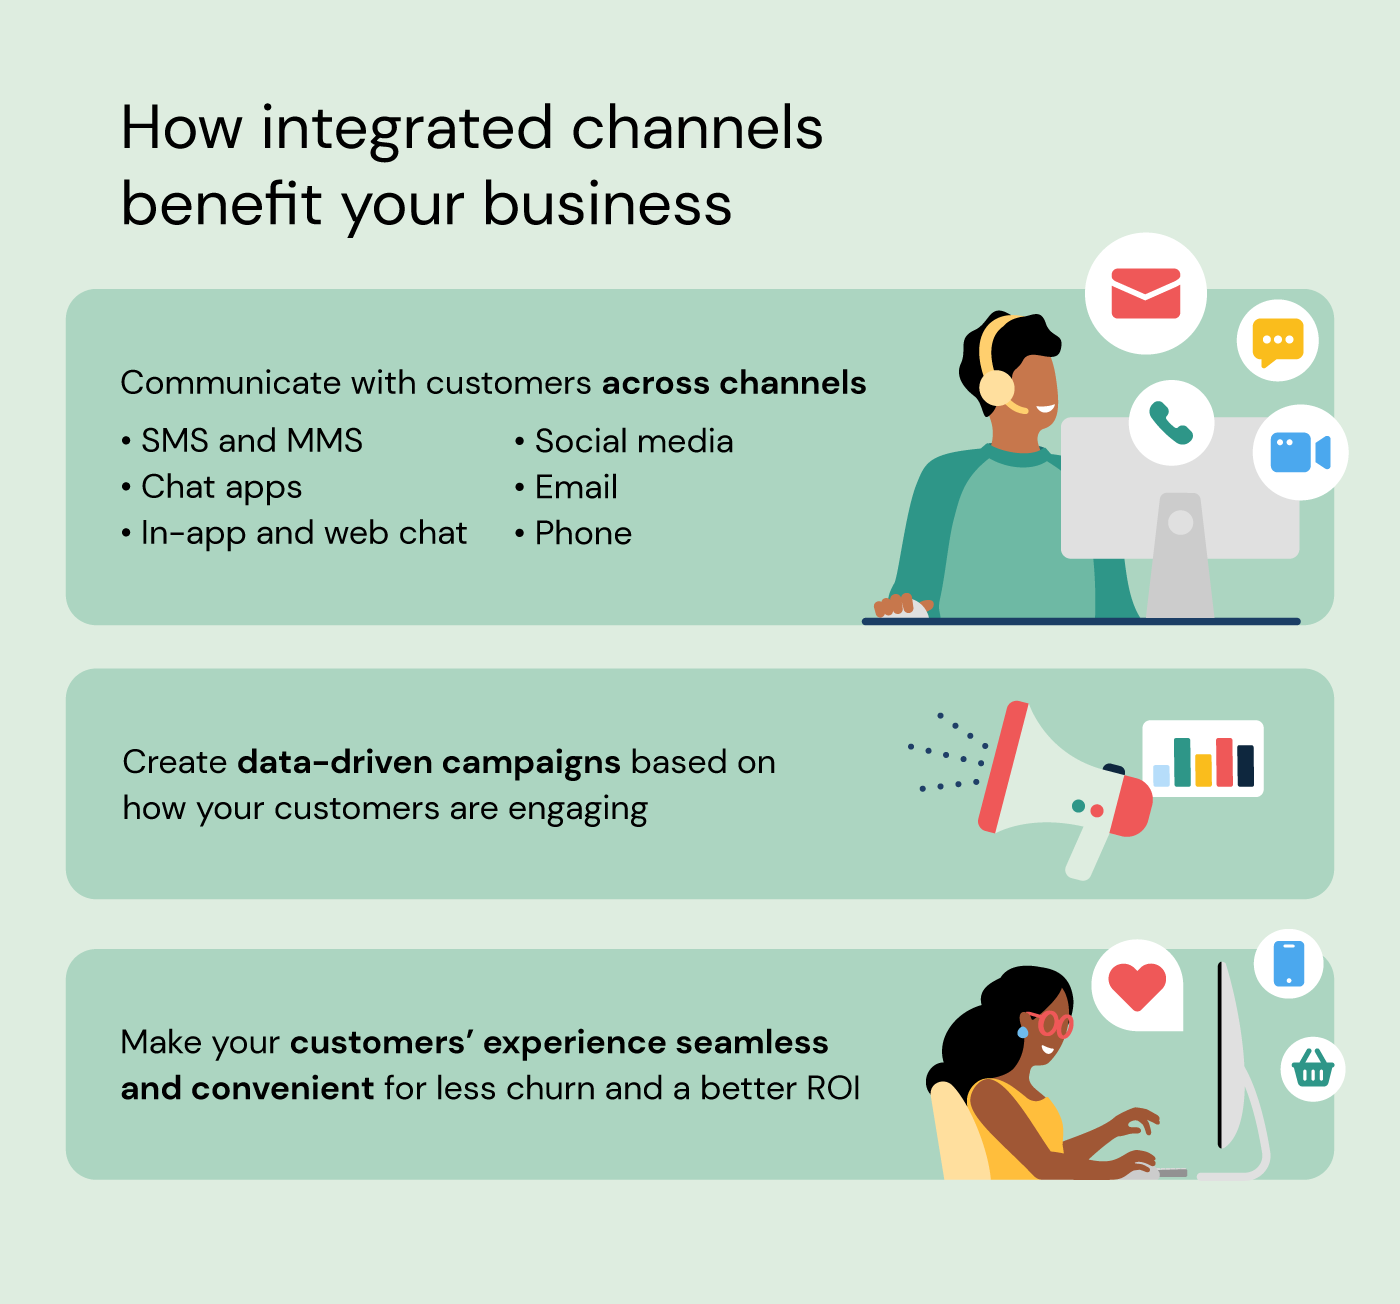 How integrated channels benefit your business: Communicate with customers across all channels, create data-driven campaigns based on how your customers are engaging, and make your customers' experience seamless and convenient for less churn and a better ROI.